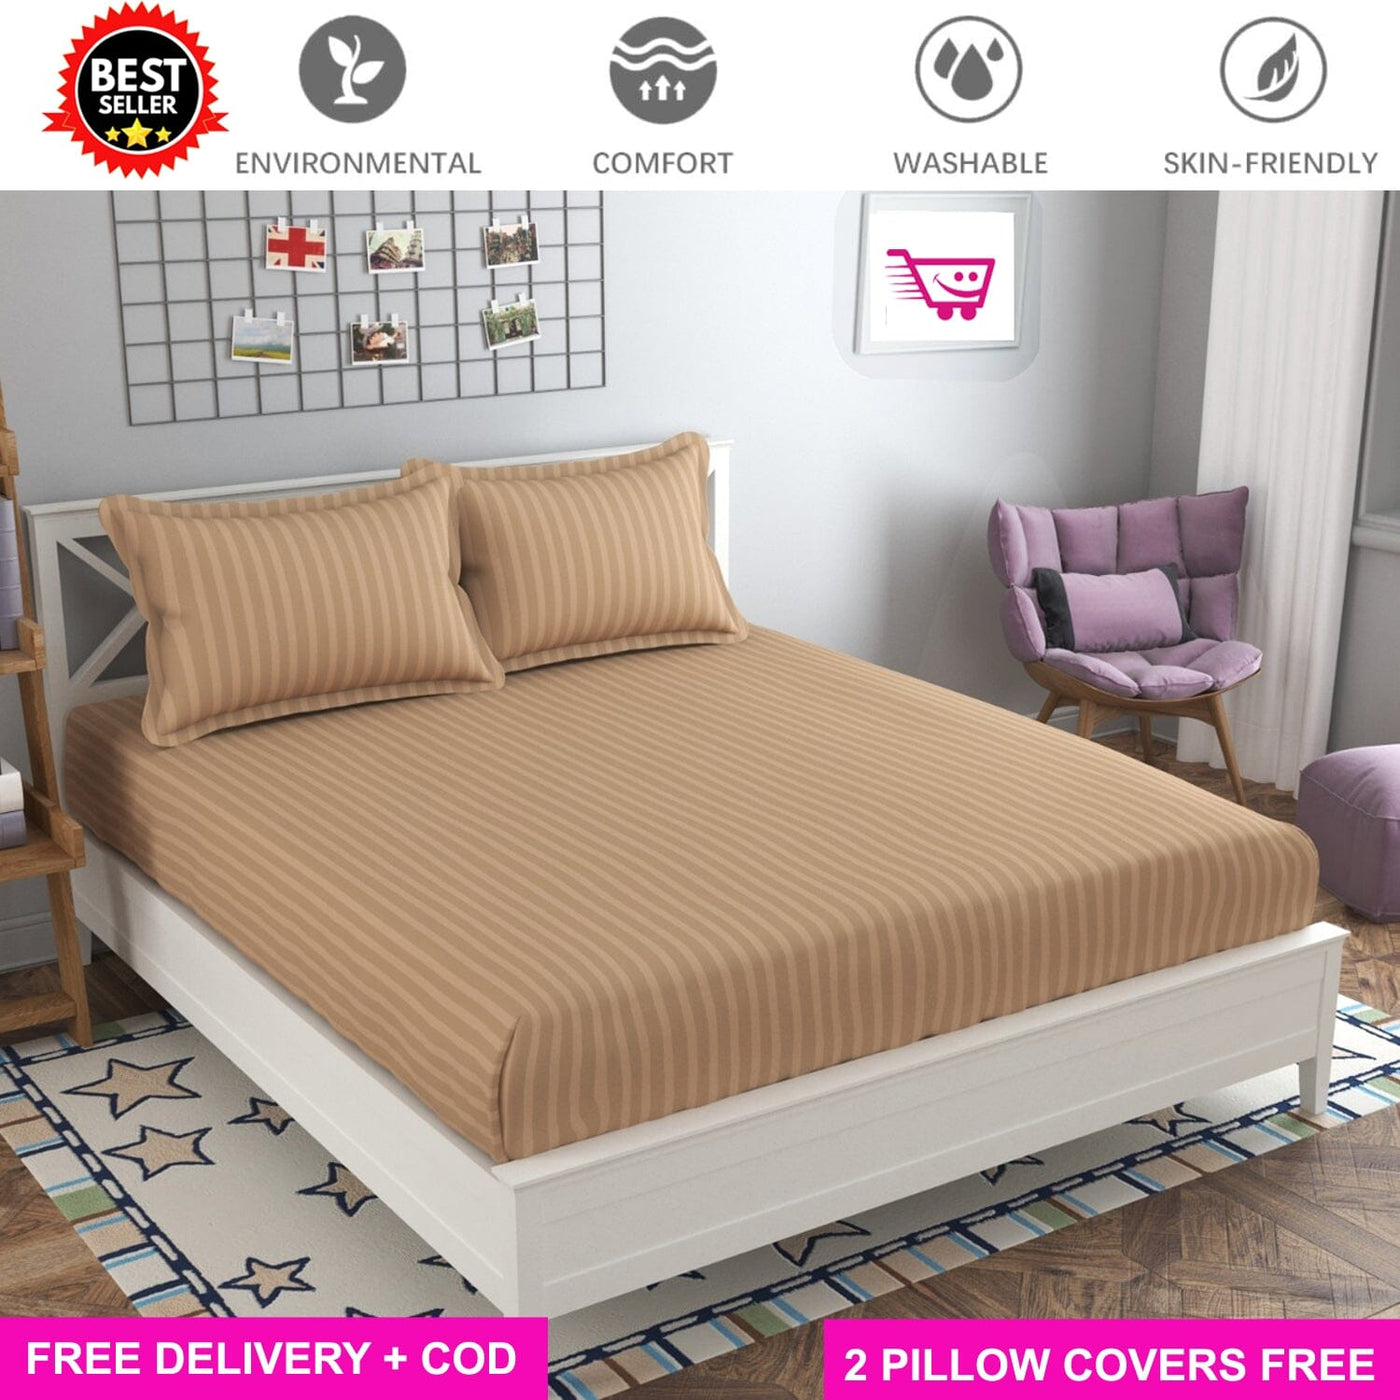 Beige Satin Full Elastic Fitted Bedsheet with 2 Pillow Covers - King Size Bed Sheets Great Happy IN 